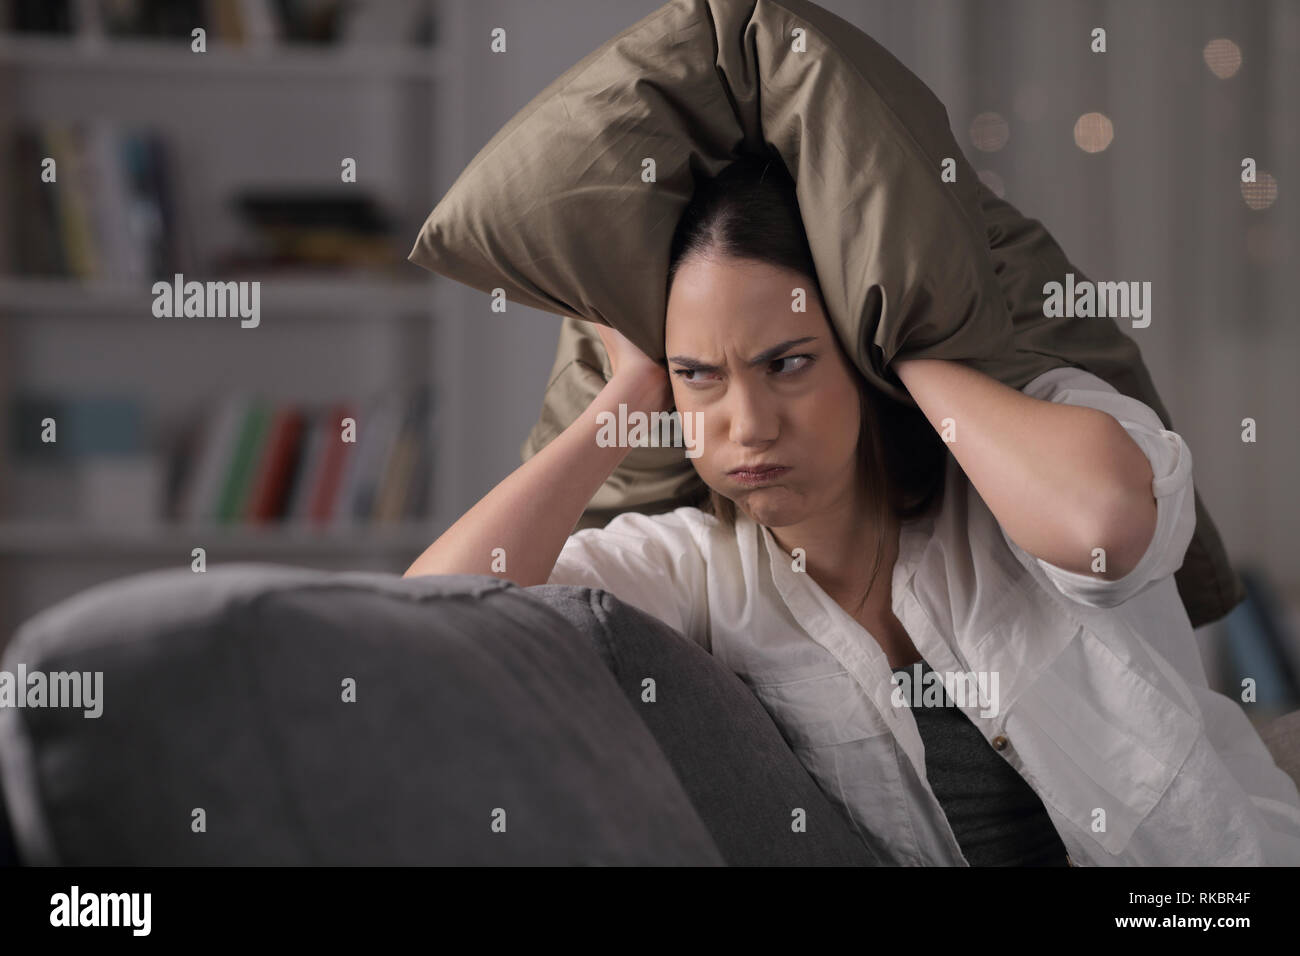 Angry homeowner suffering neighbor noise covering ears sitting on a couch in the night at home Stock Photo